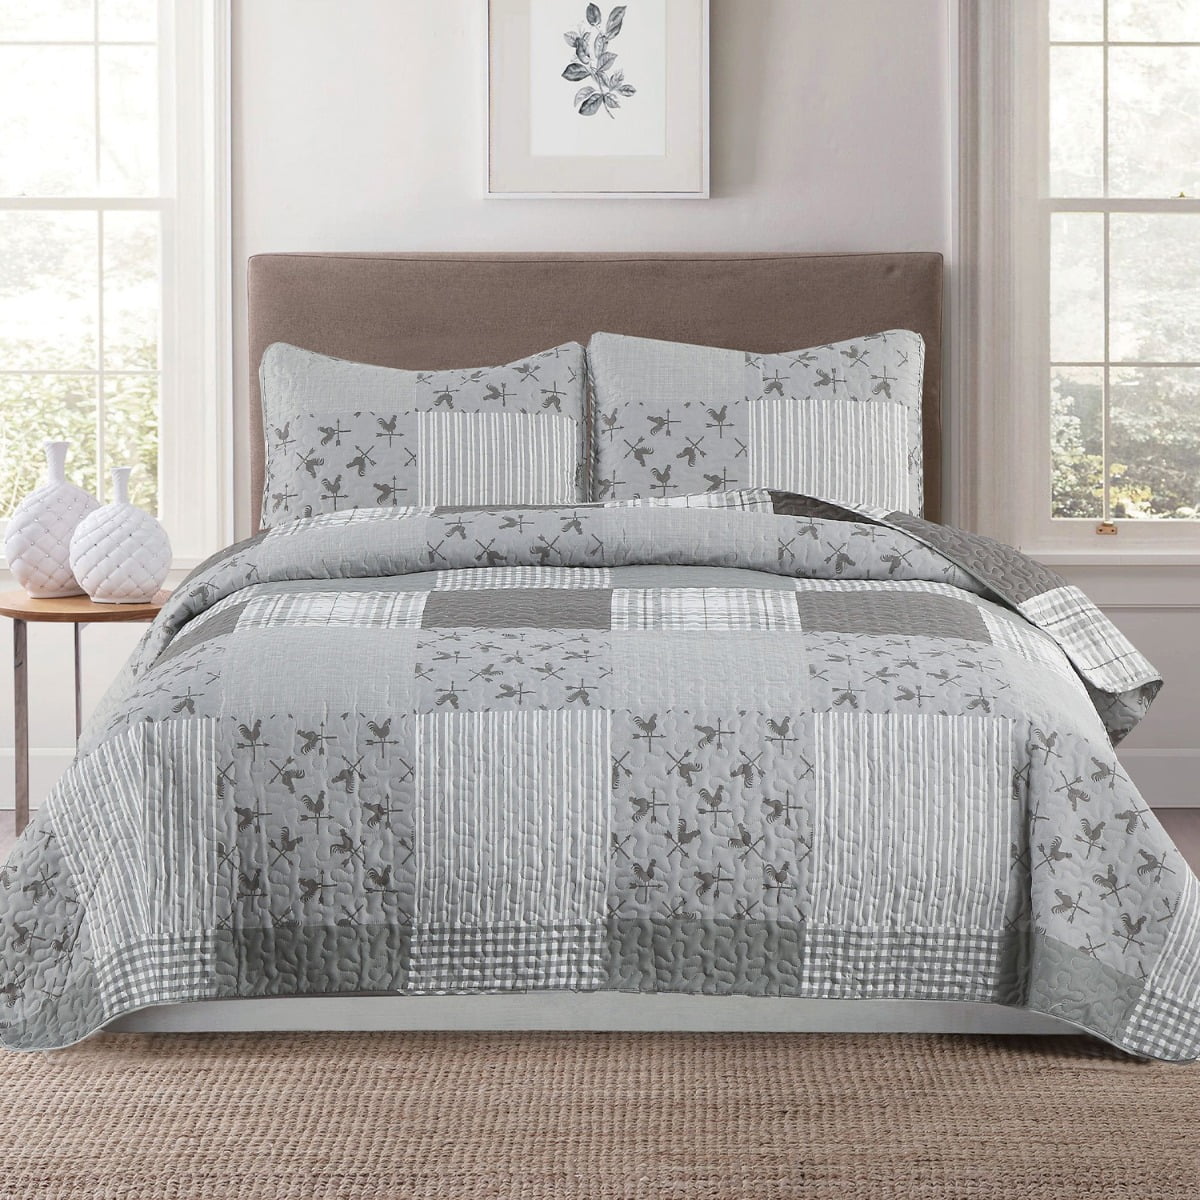 Queen Size Bedding Quilt Set Farm Cabin Lodge Country Grey Patchwork Style 3Pc 